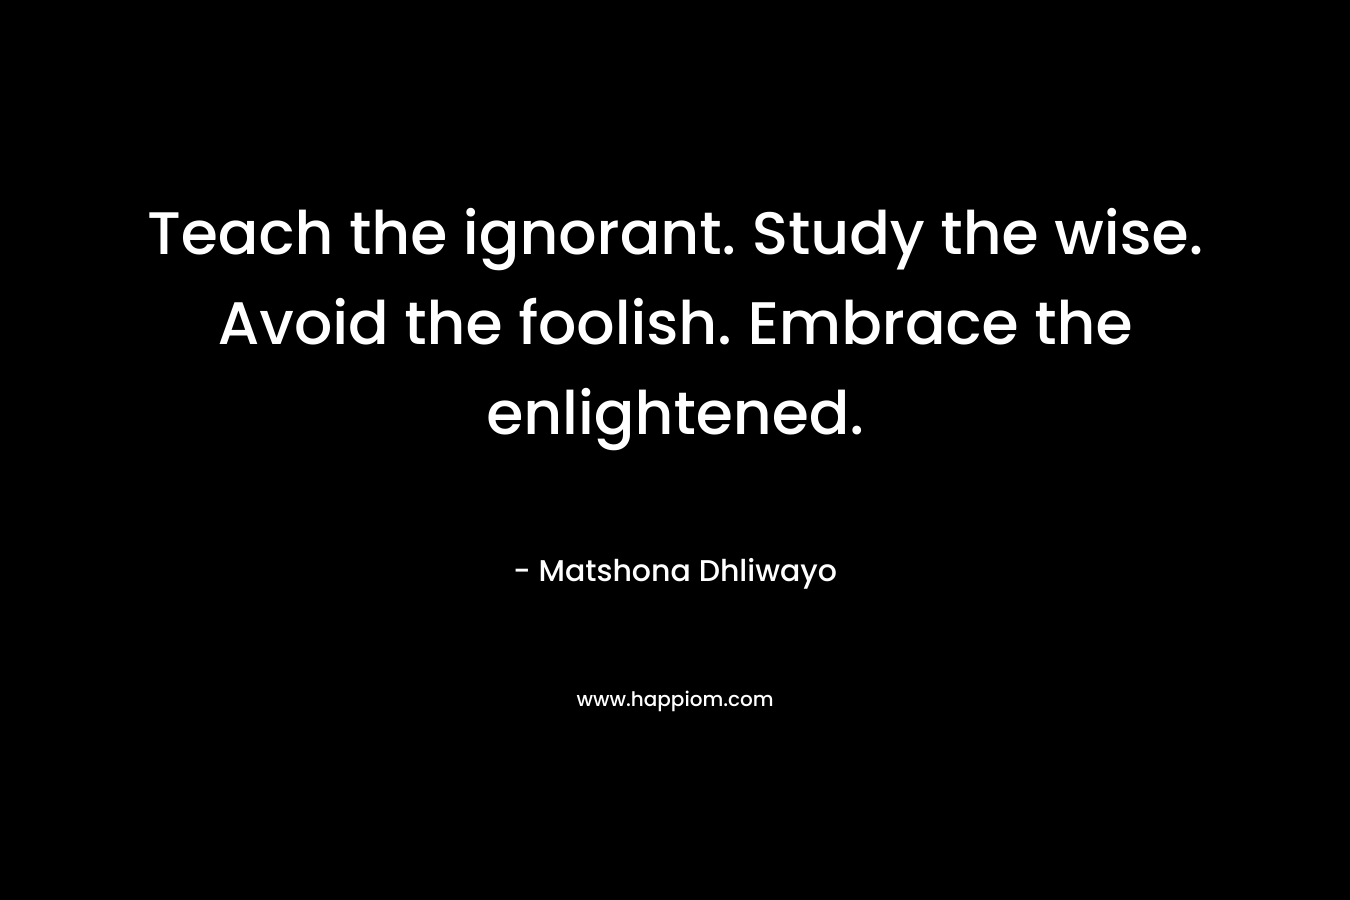 Teach the ignorant. Study the wise. Avoid the foolish. Embrace the enlightened.